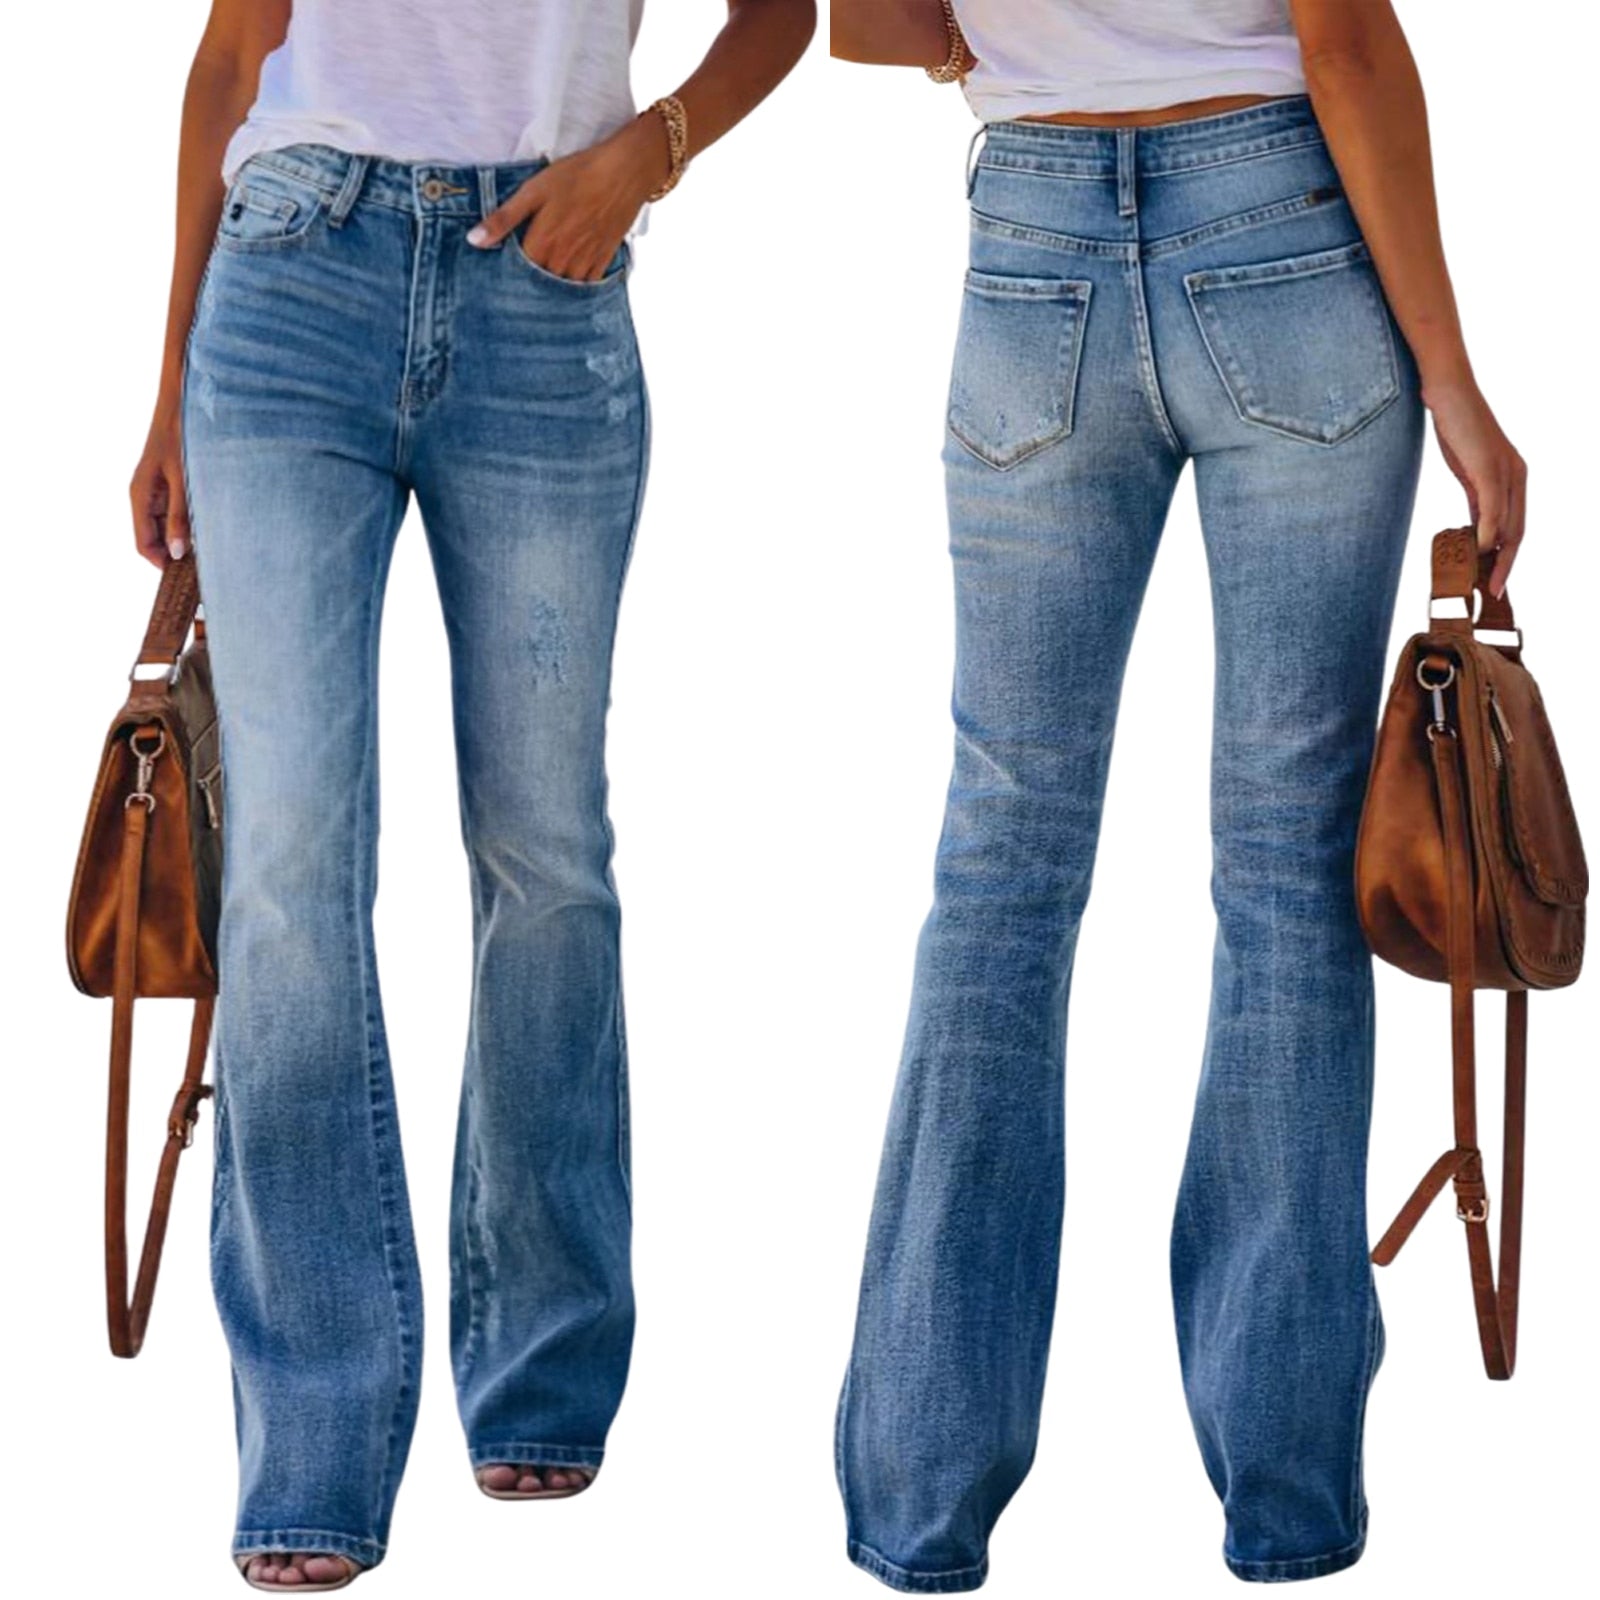 Casual Fitting Jeans High Waist Stylish Stretch Flared Pants KilyClothing